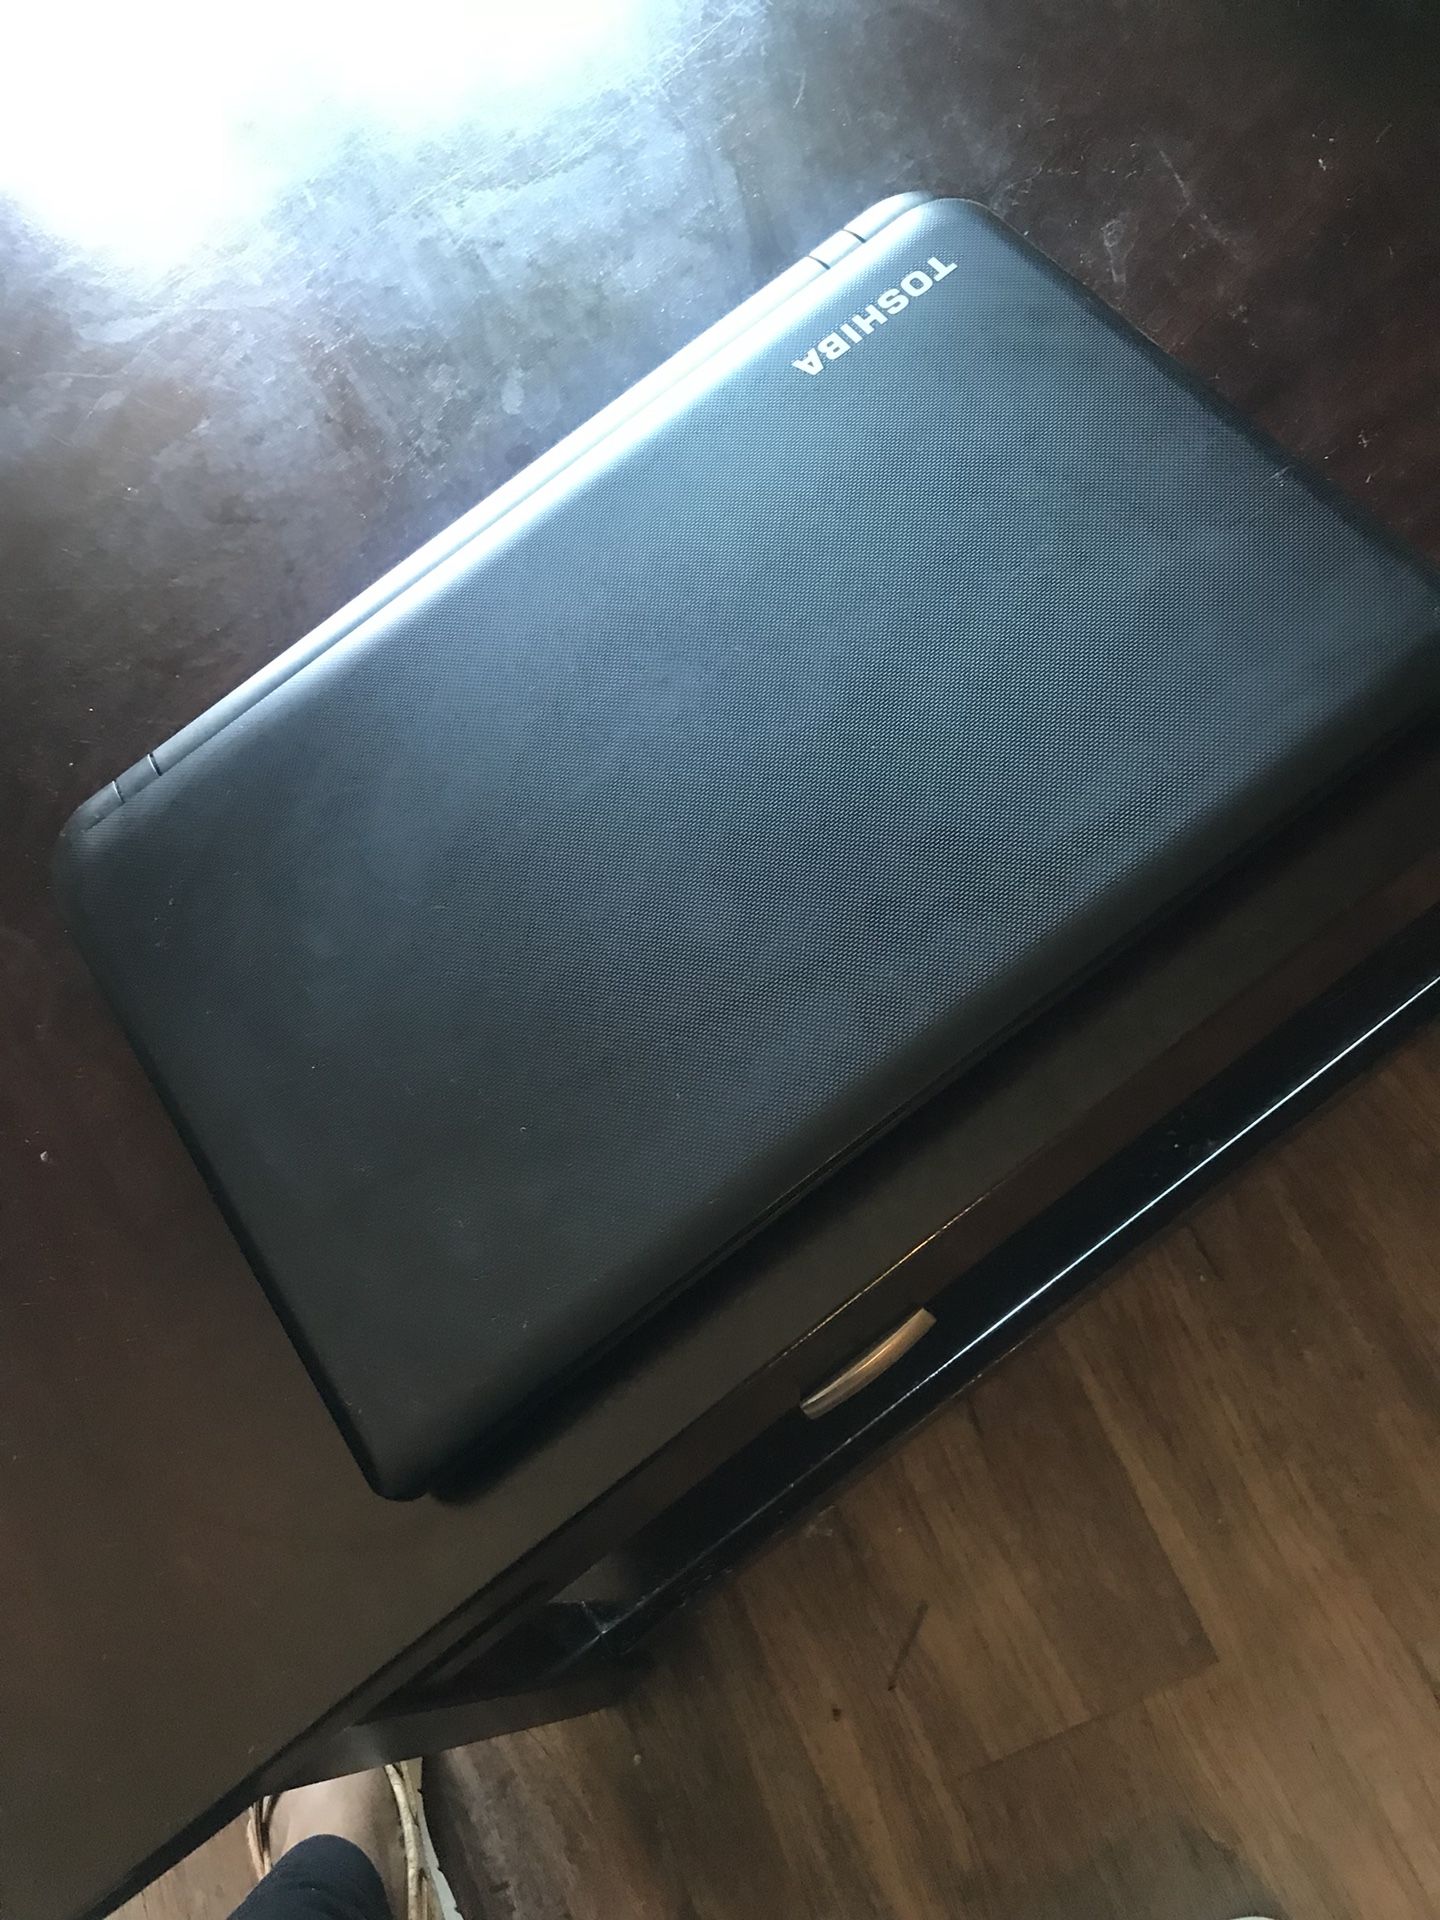 2 year old Toshiba Laptop, barely used. Got a Macbook right after I got this one